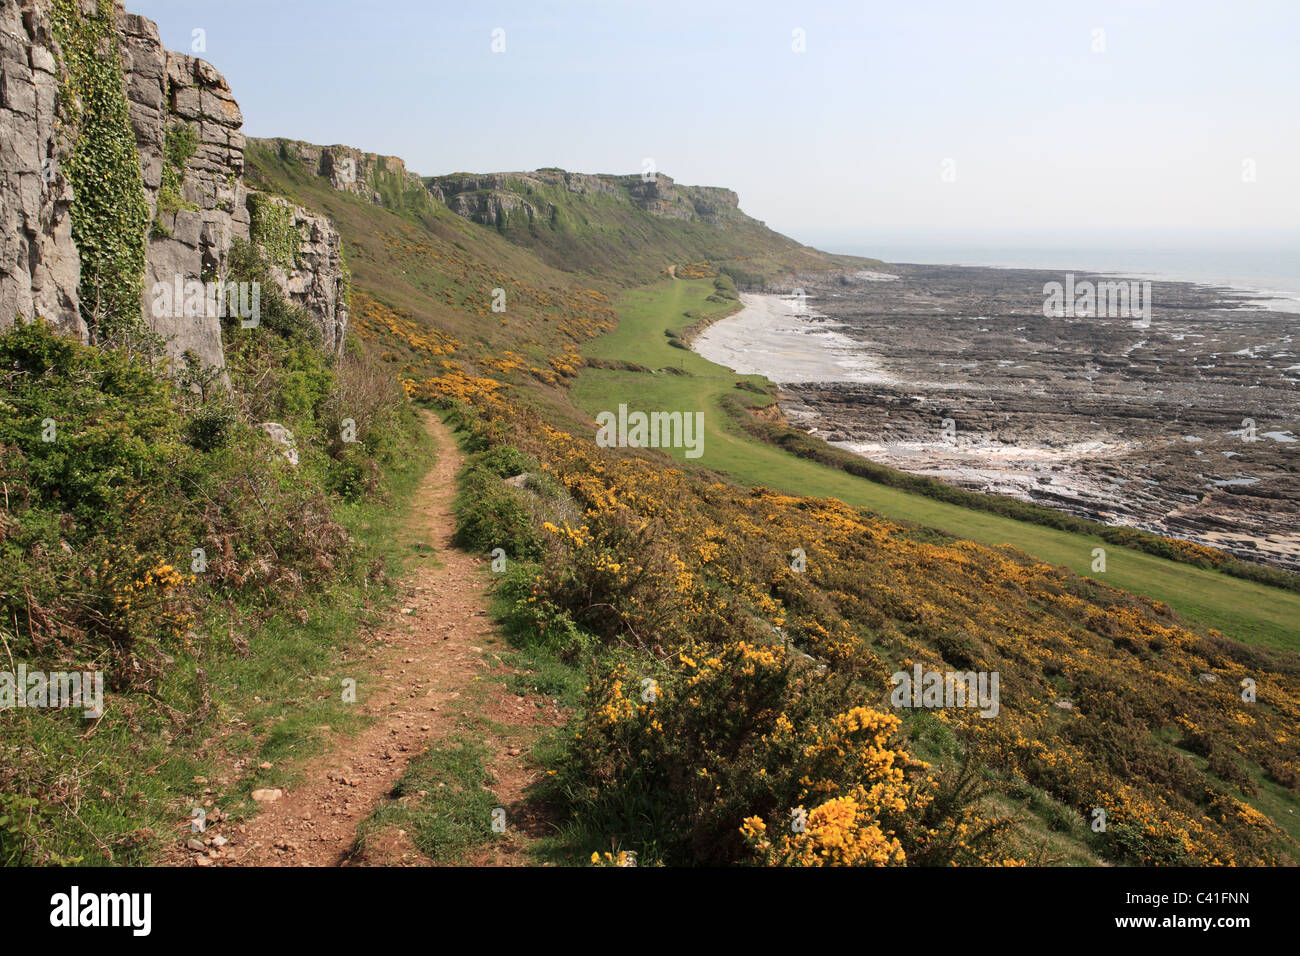 A view along the cliff path at Oxwich Bay, Gower Peninsular, South Wales, UK Stock Photo